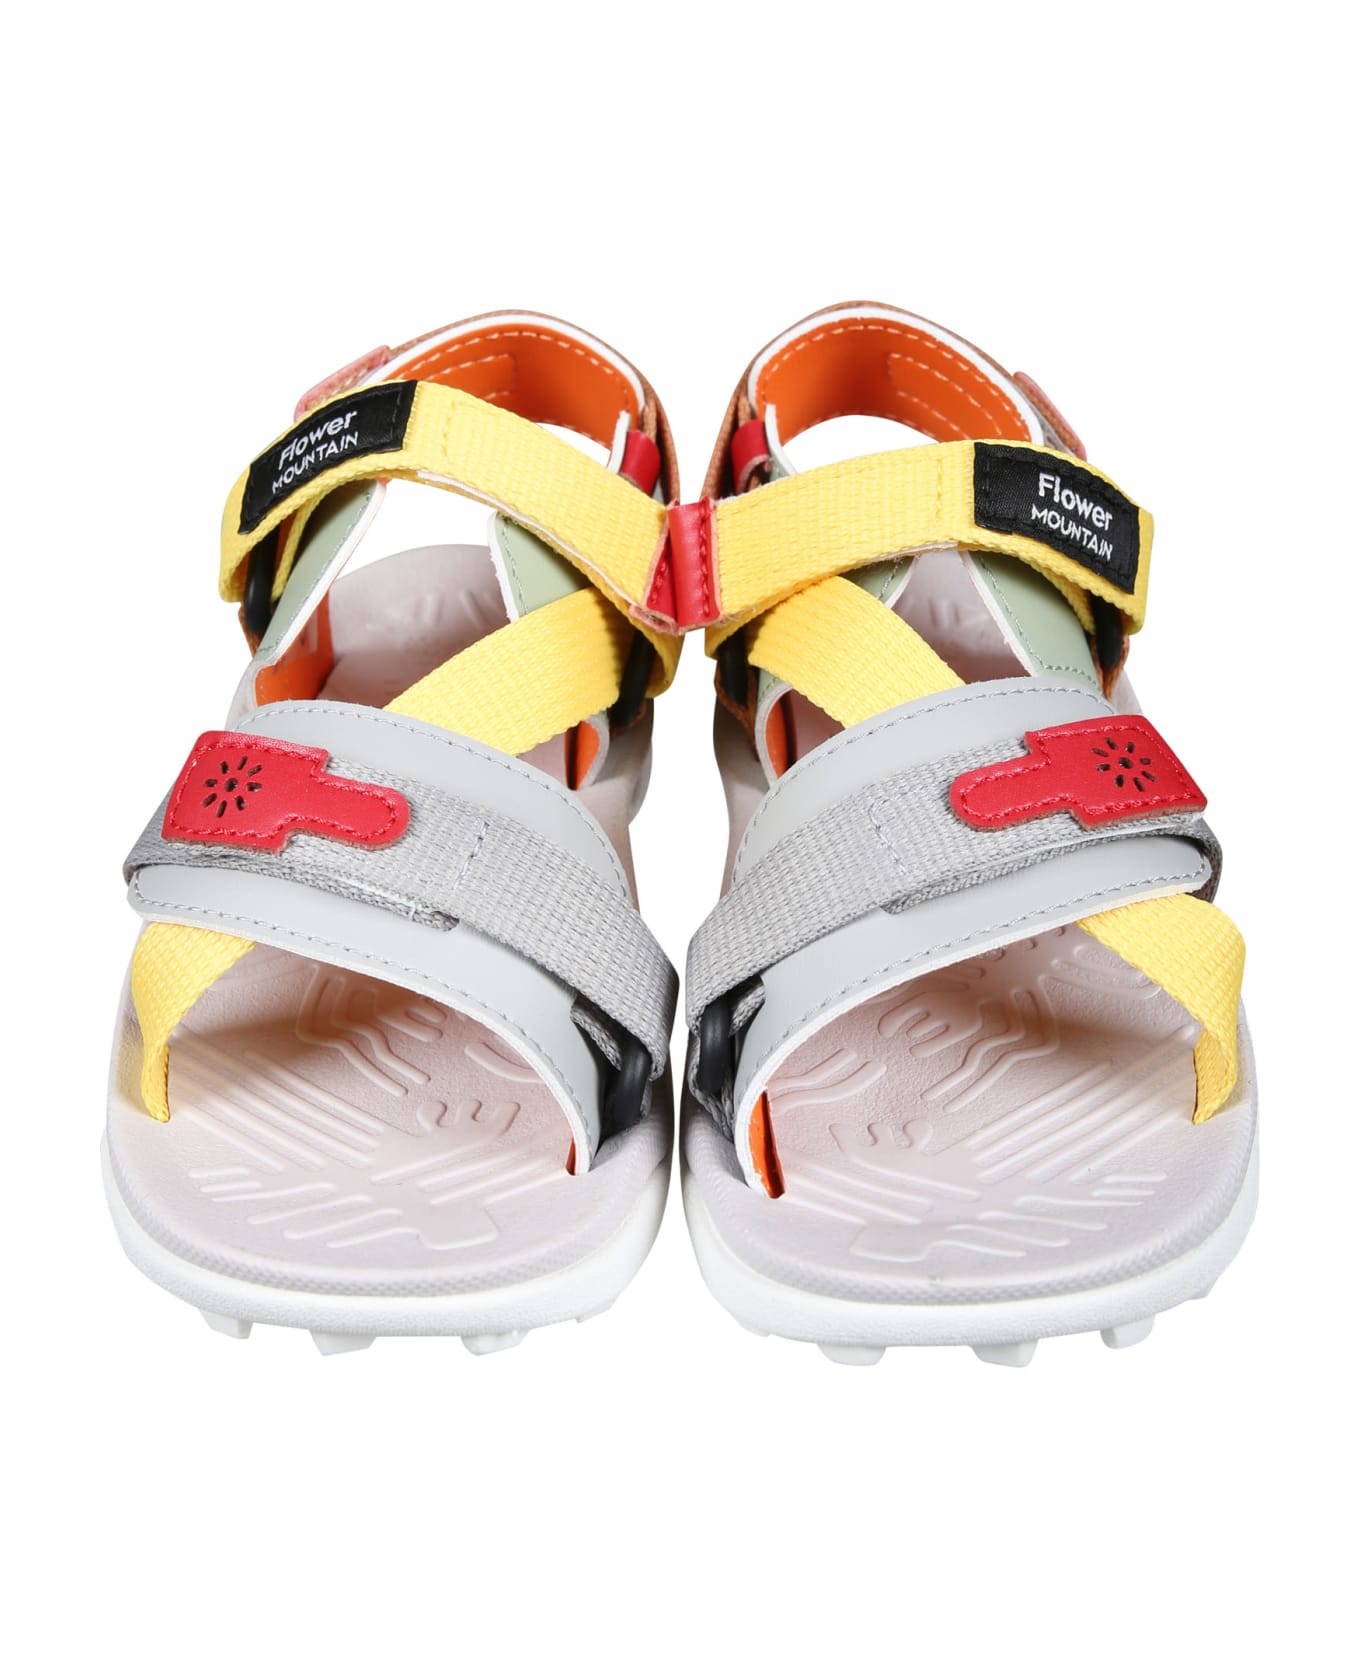 Flower Mountain Multicolor Nazca Sandals For Boy With Logo - Multicolor シューズ